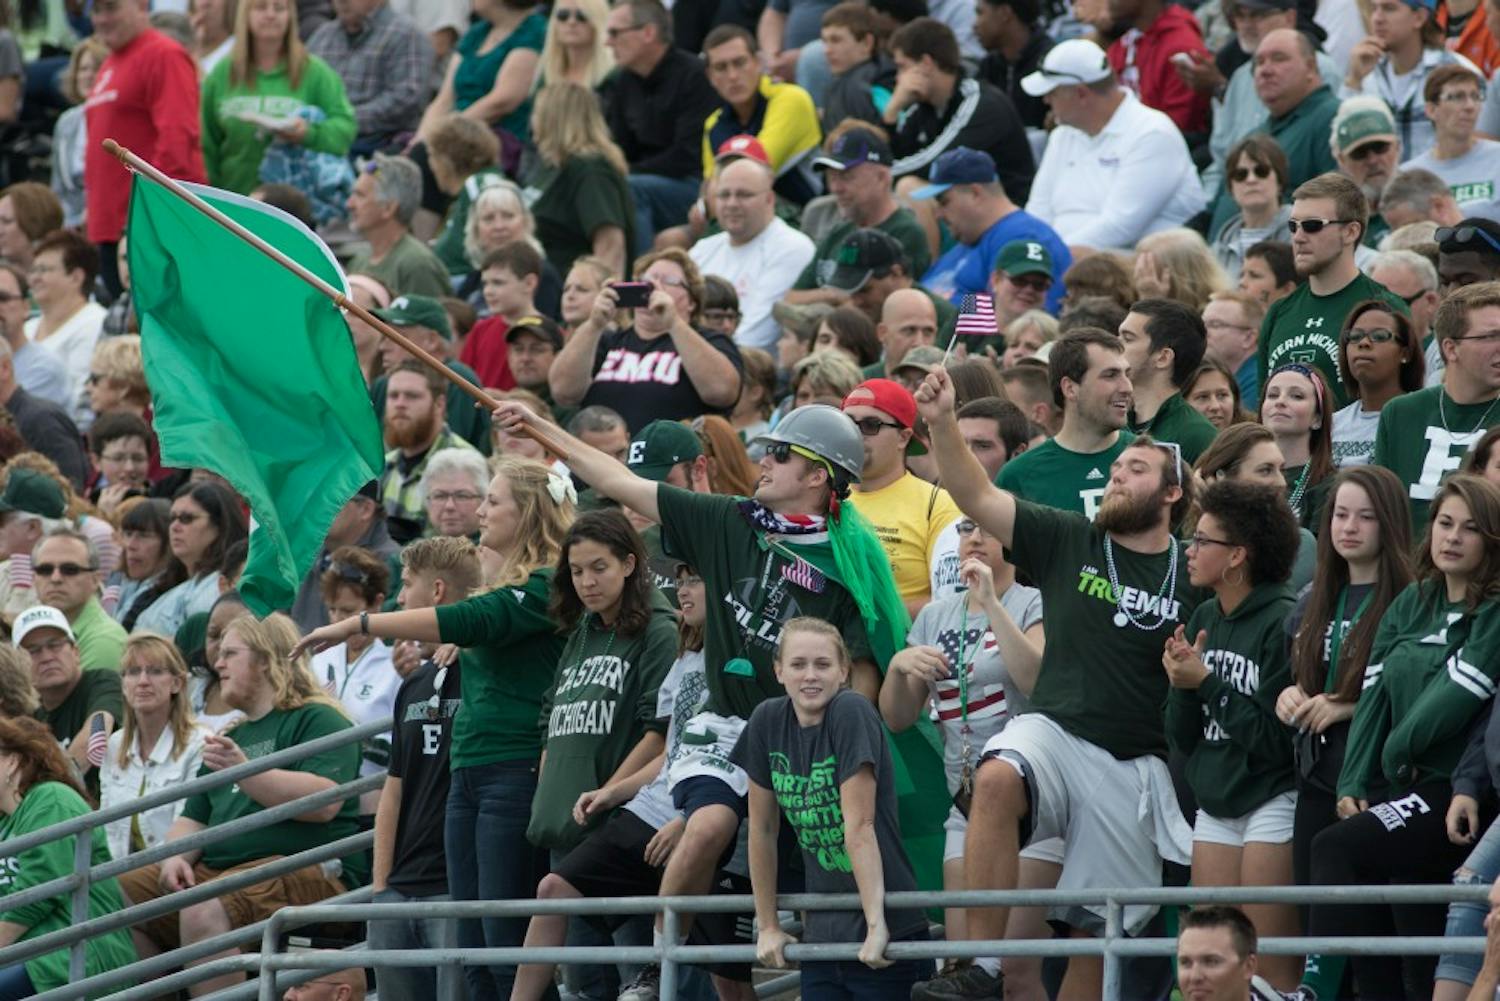 Eastern Michigan students filed in to watch the Eagles take on Army on Sept. 26 2015 in Ypsilanti, Mich.